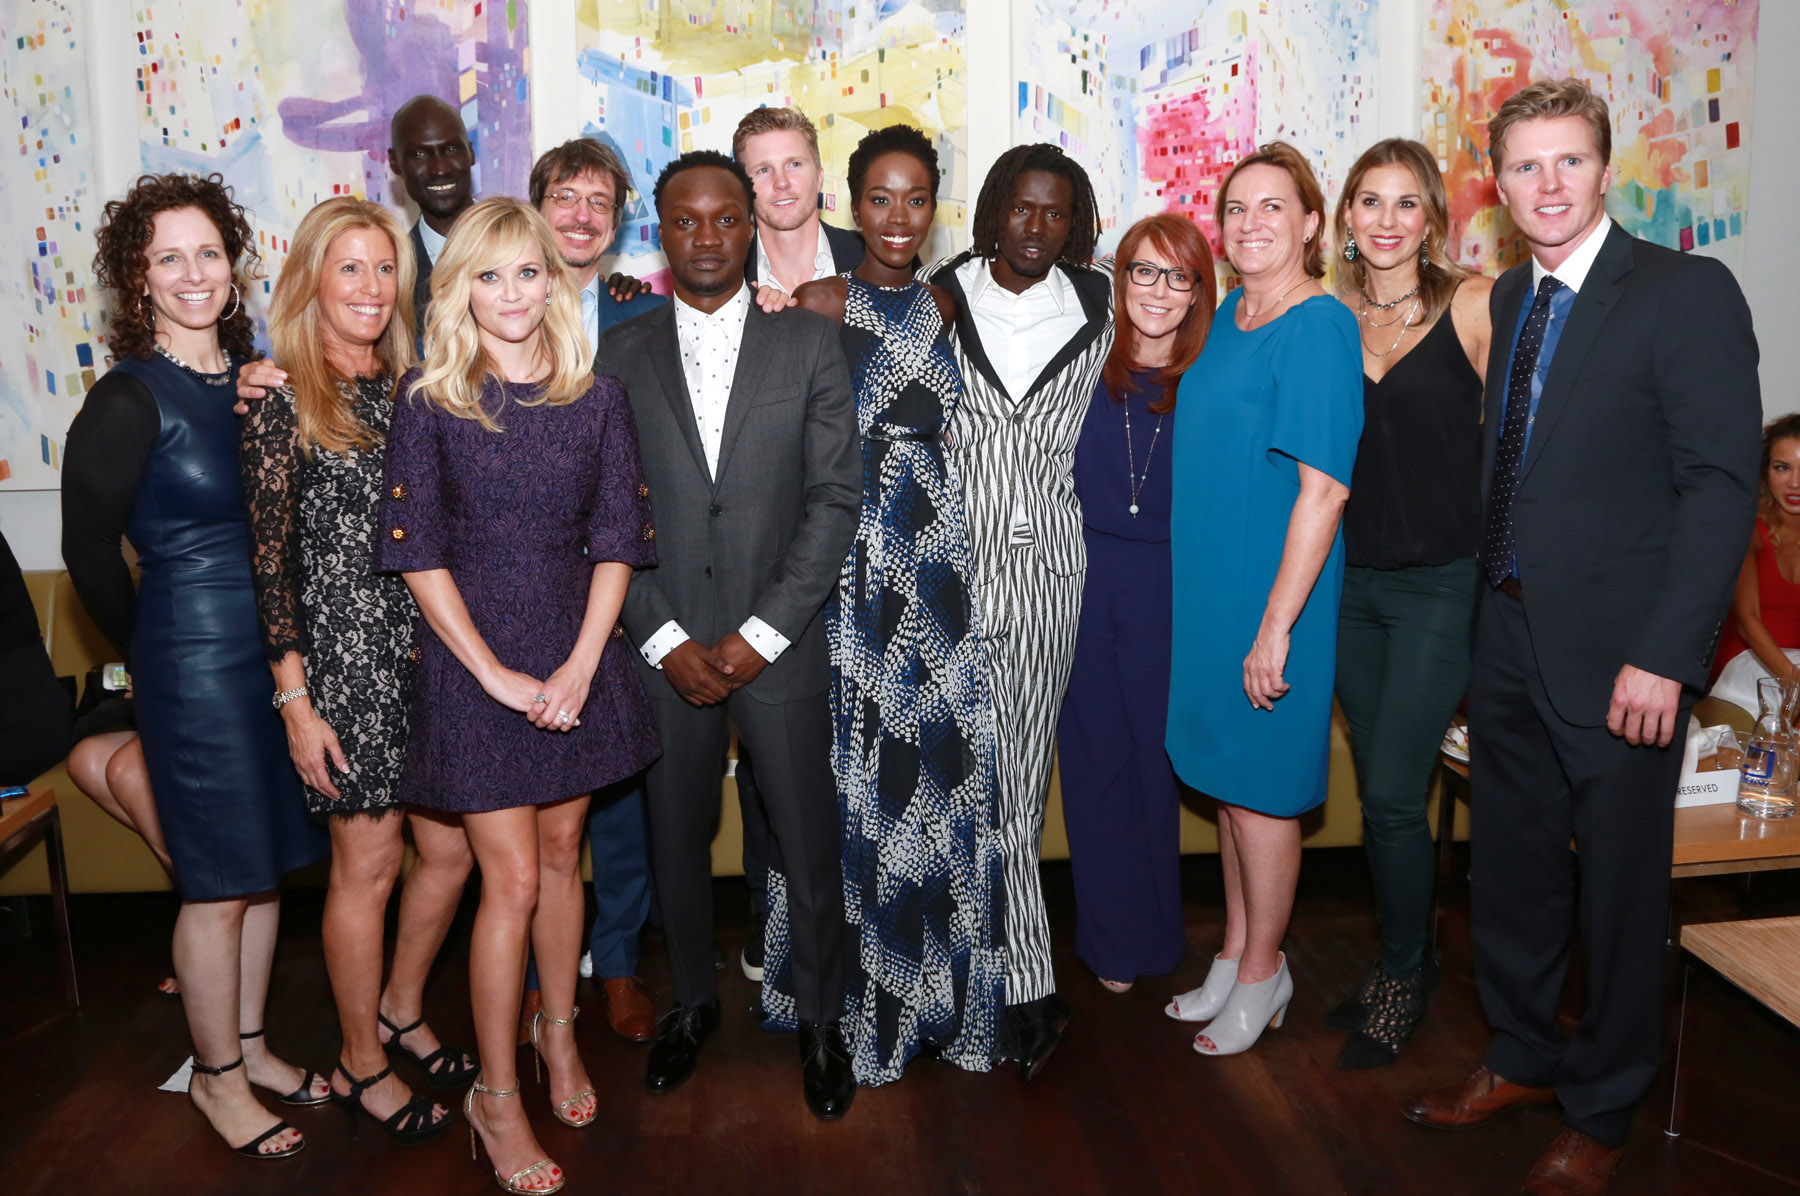 The Good Lie cast, writer, director and production at TIFF.